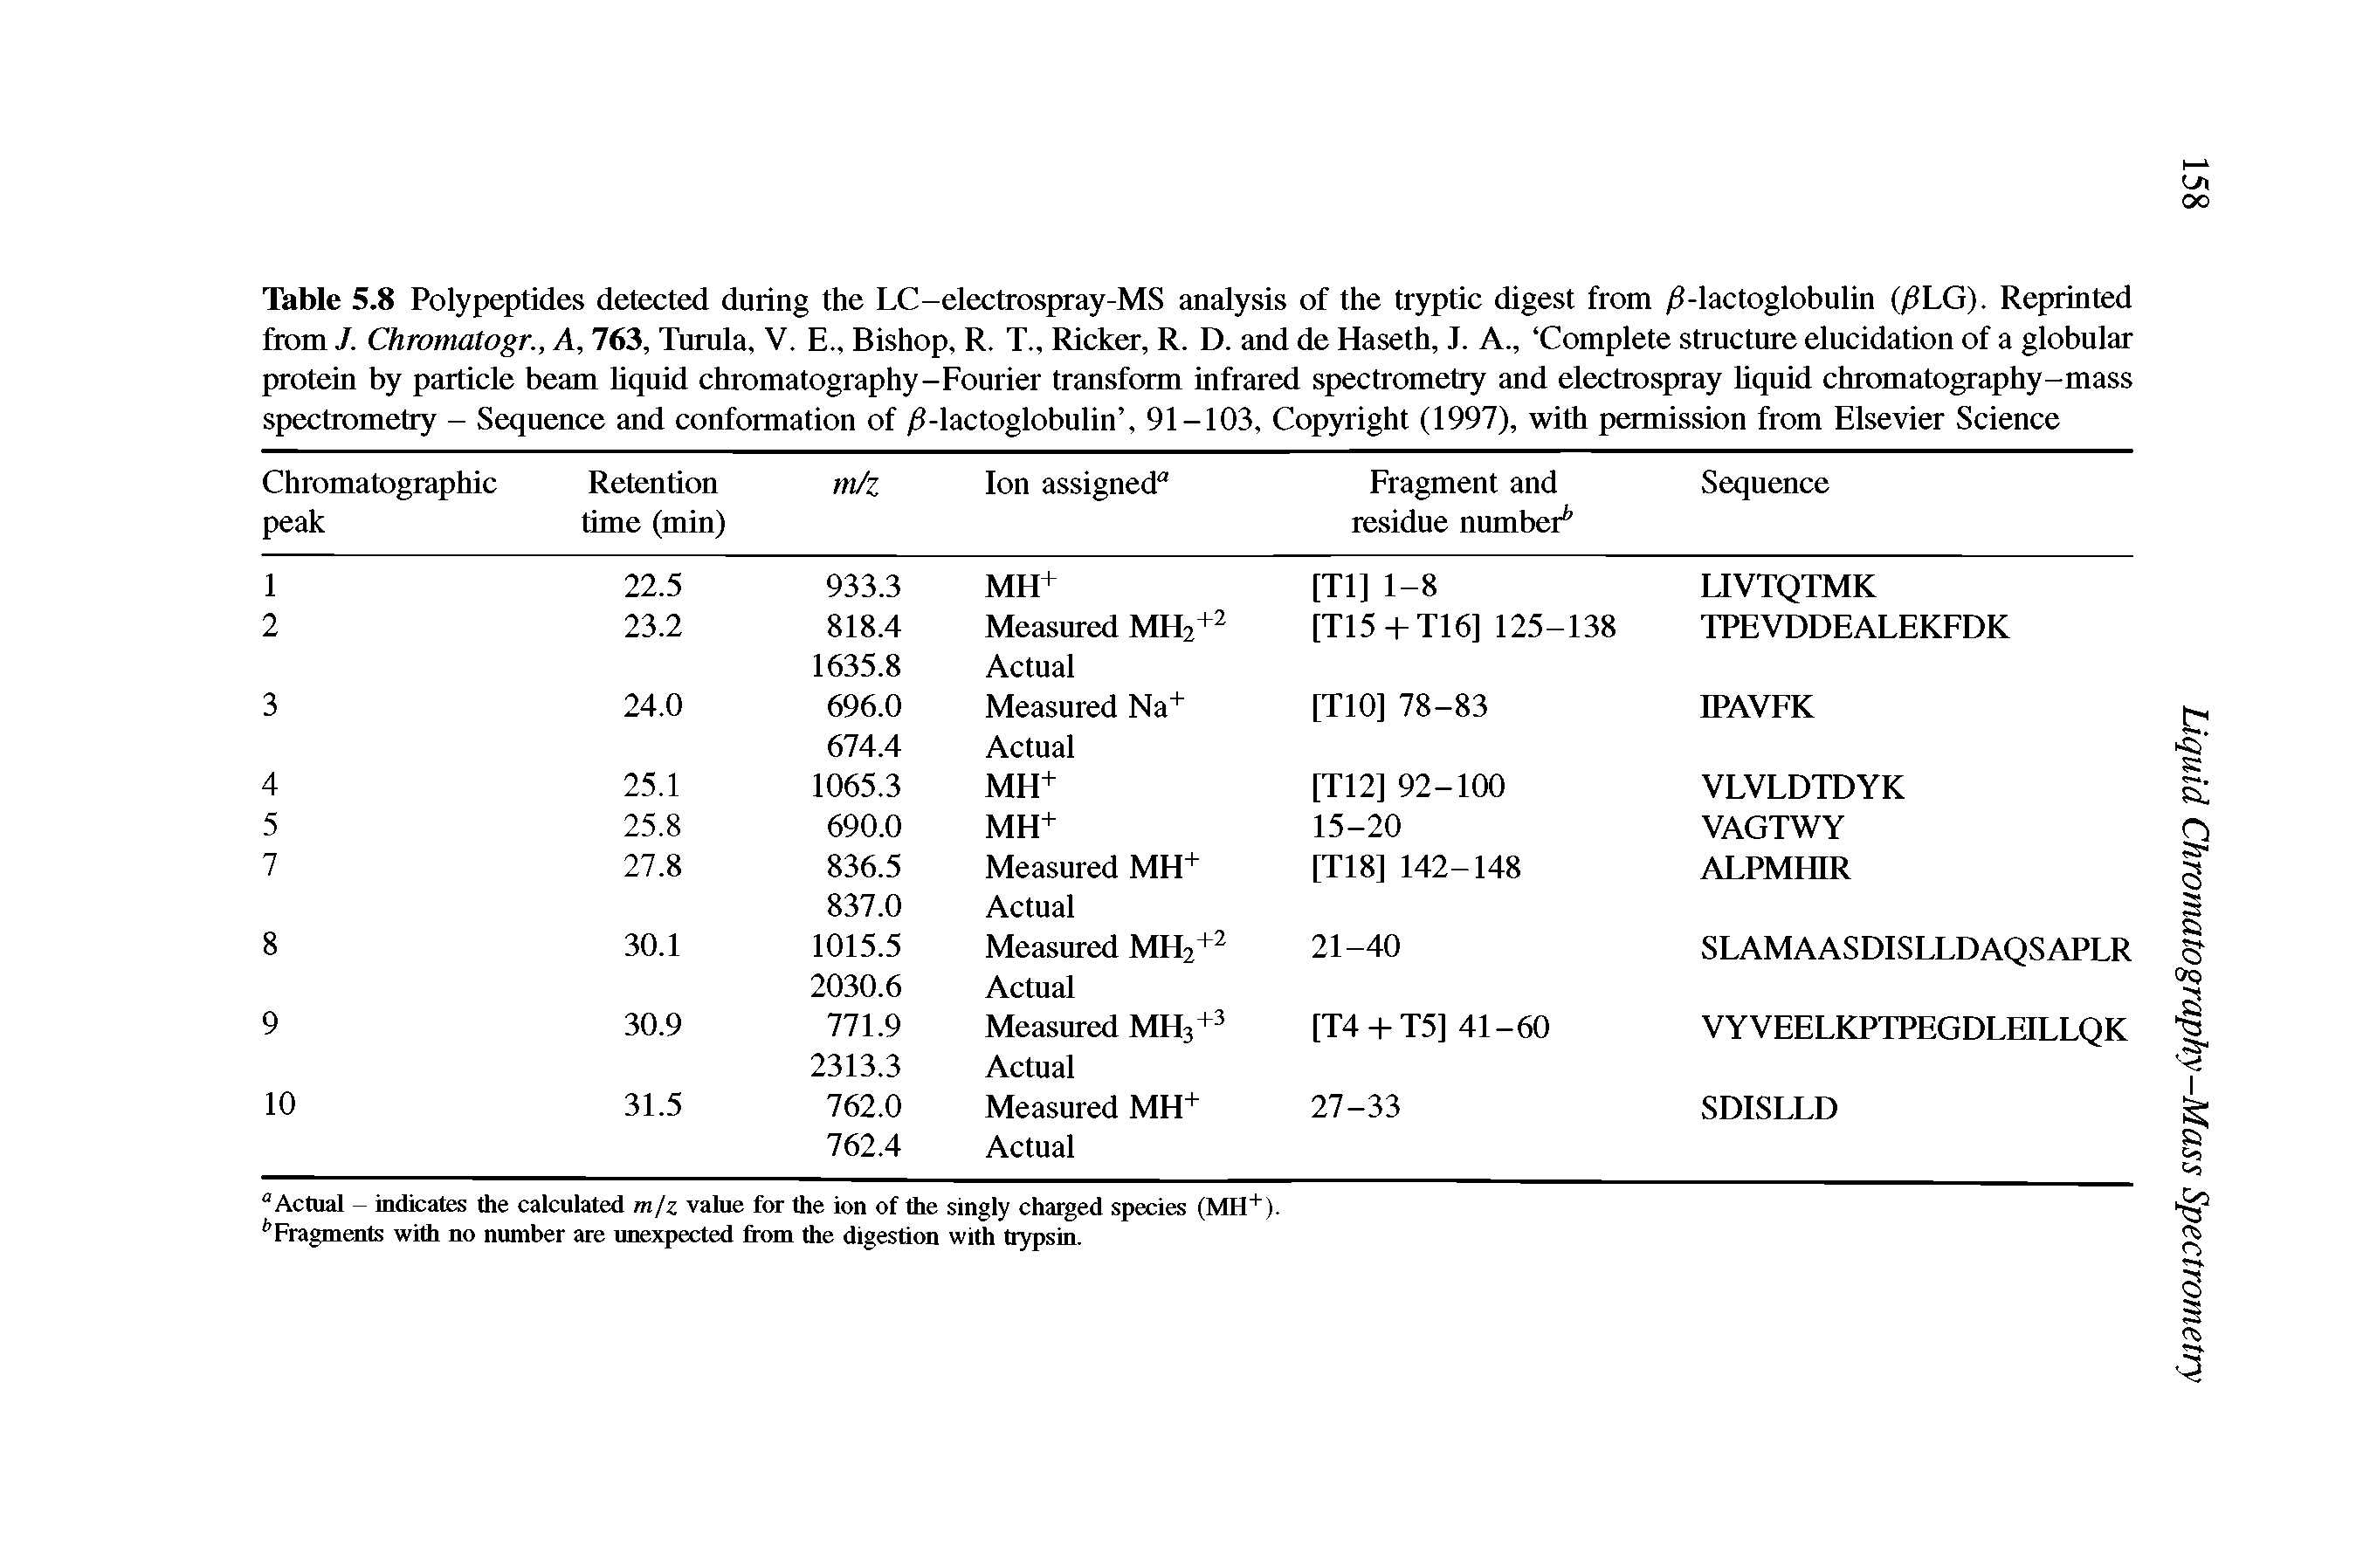 Table 5.8 Polypeptides detected during the LC-electrospray-MS analysis of the tryptic digest from / -lactoglobulin (/ILG). Reprinted from 7. Chromatogr., A, 763, Tnrnla, V. E., Bishop, R. T., Ricker, R. D. and de Haseth, J. A., Complete structnre elncidation of a globular protein by particle beam hqnid chromatography-Fourier transform infrared spectrometry and electrospray hqnid chromatography-mass spectrometry - Seqnence and conformation of / -lactoglobulin , 91-103, Copyright (1997), with permission from Elsevier Science...